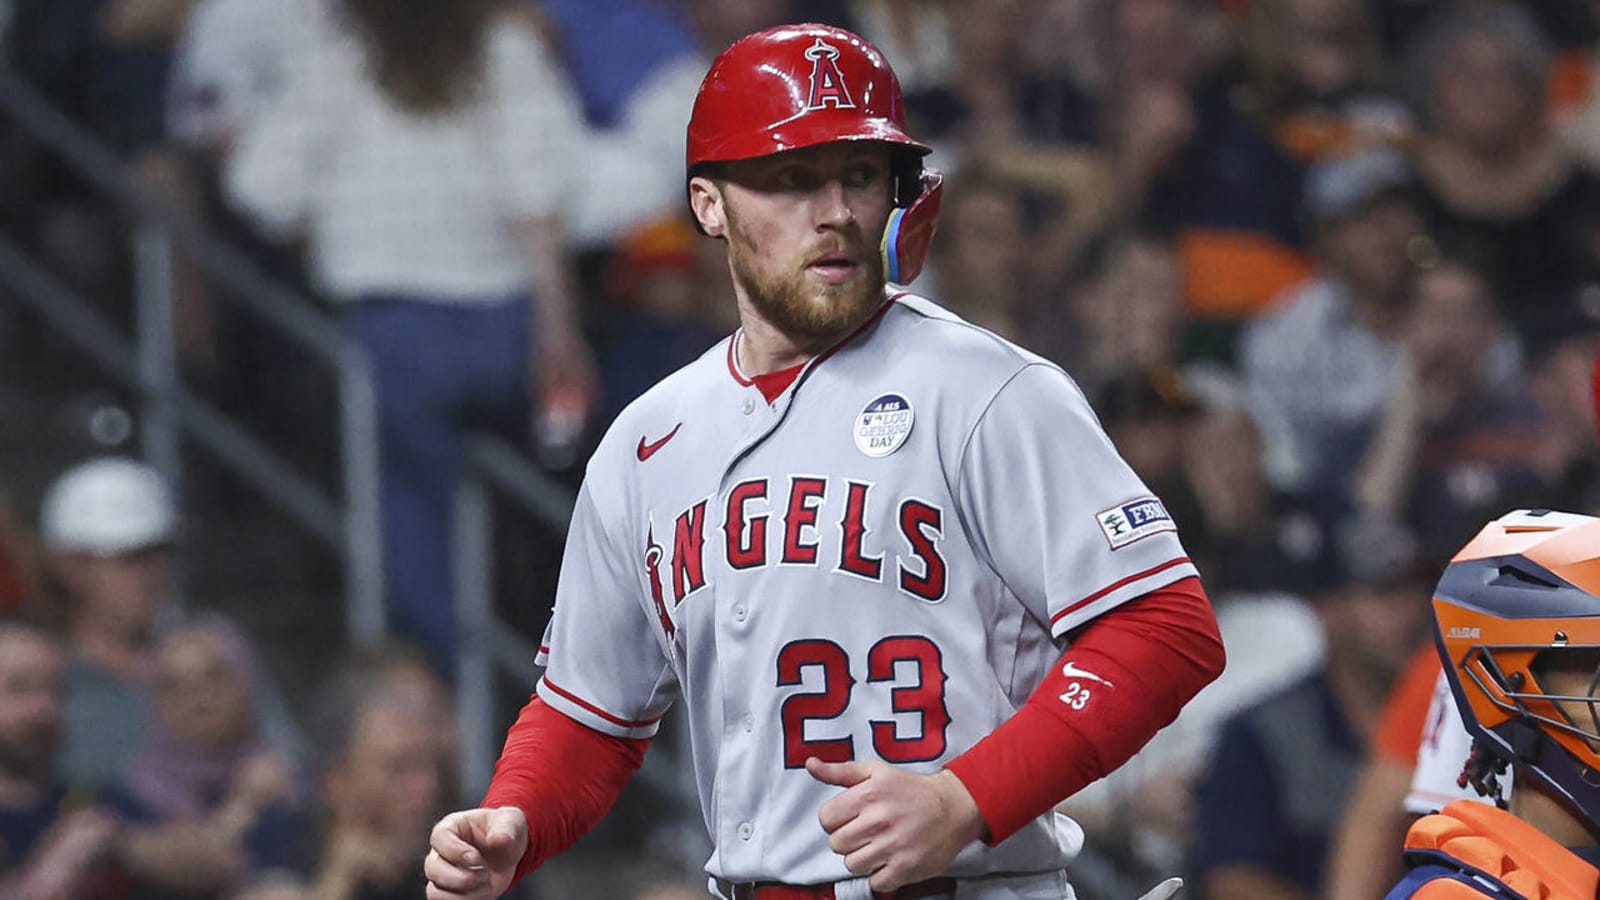 Angels infielder suspended for bumping umpire during argument